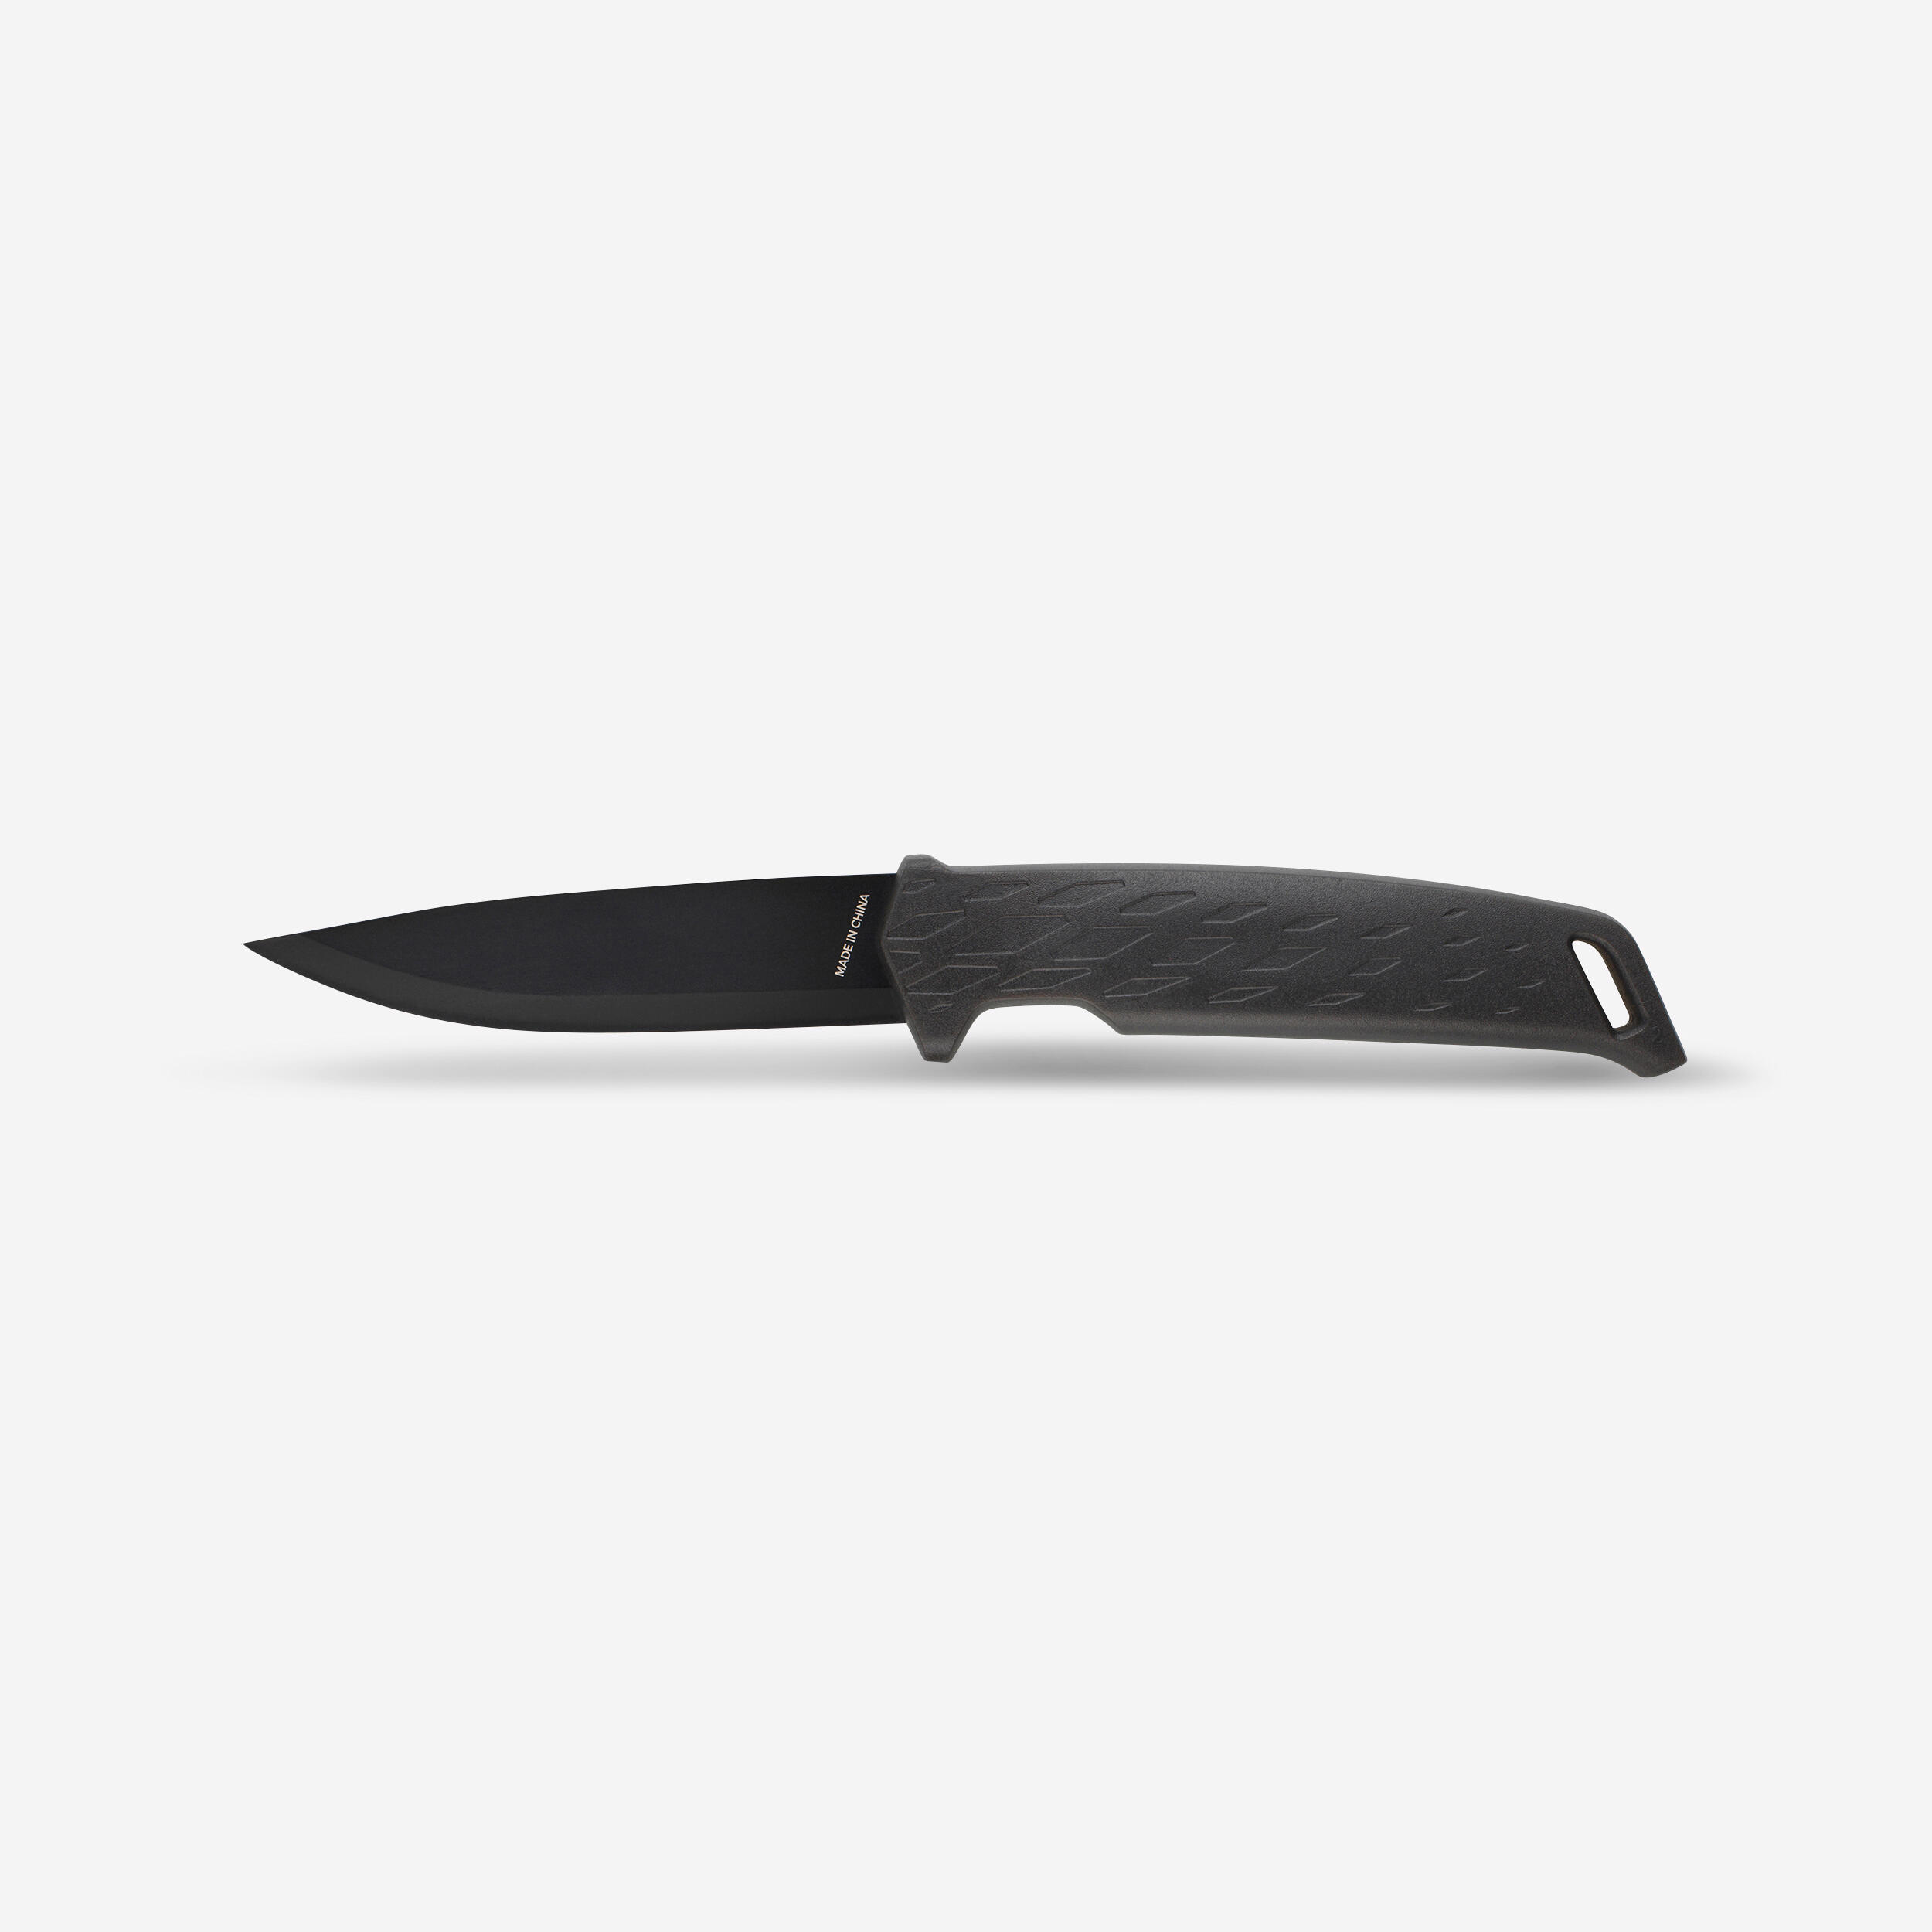 Image of Sika 100 hunting knife